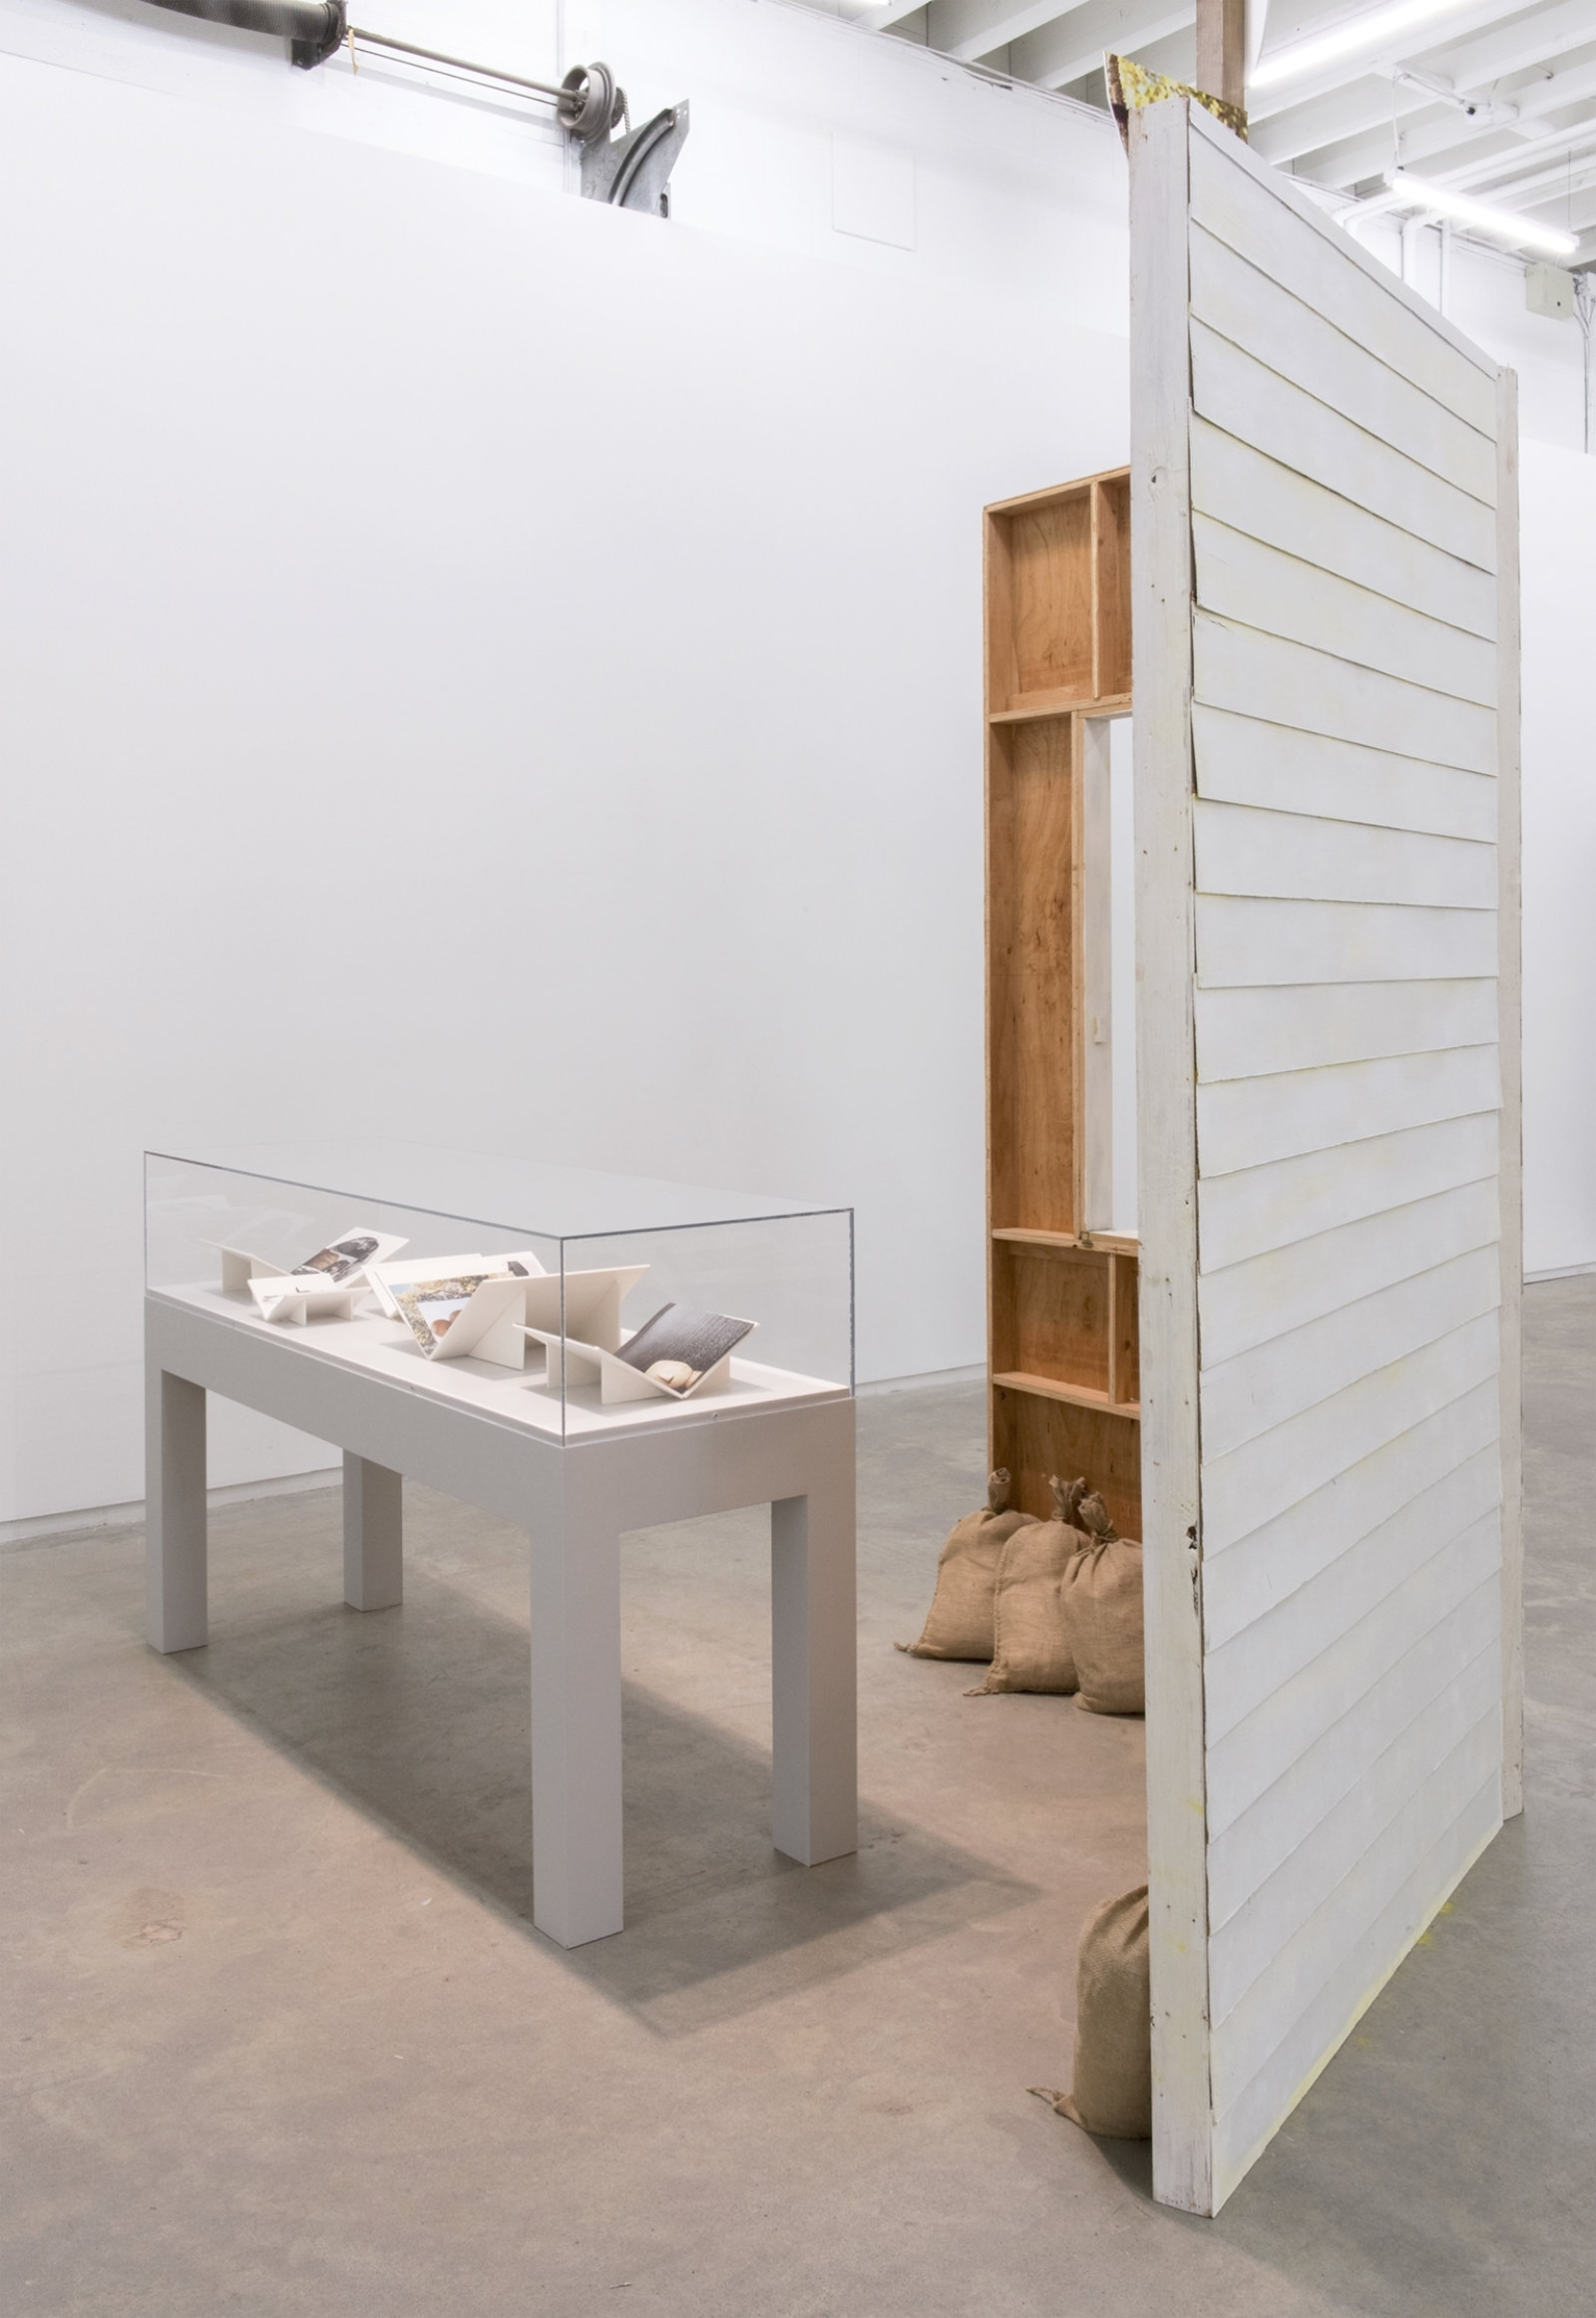 Geoffrey Farmer, Workbooks with When I got fired from that Beckett Play (Fountain), 2014, vitrine with 5 cut-outs collaged on foamcore, 2 wooden wall façades, paint, window, sandbags, framed cut-outs and ink mounted on paper, dimensions variable